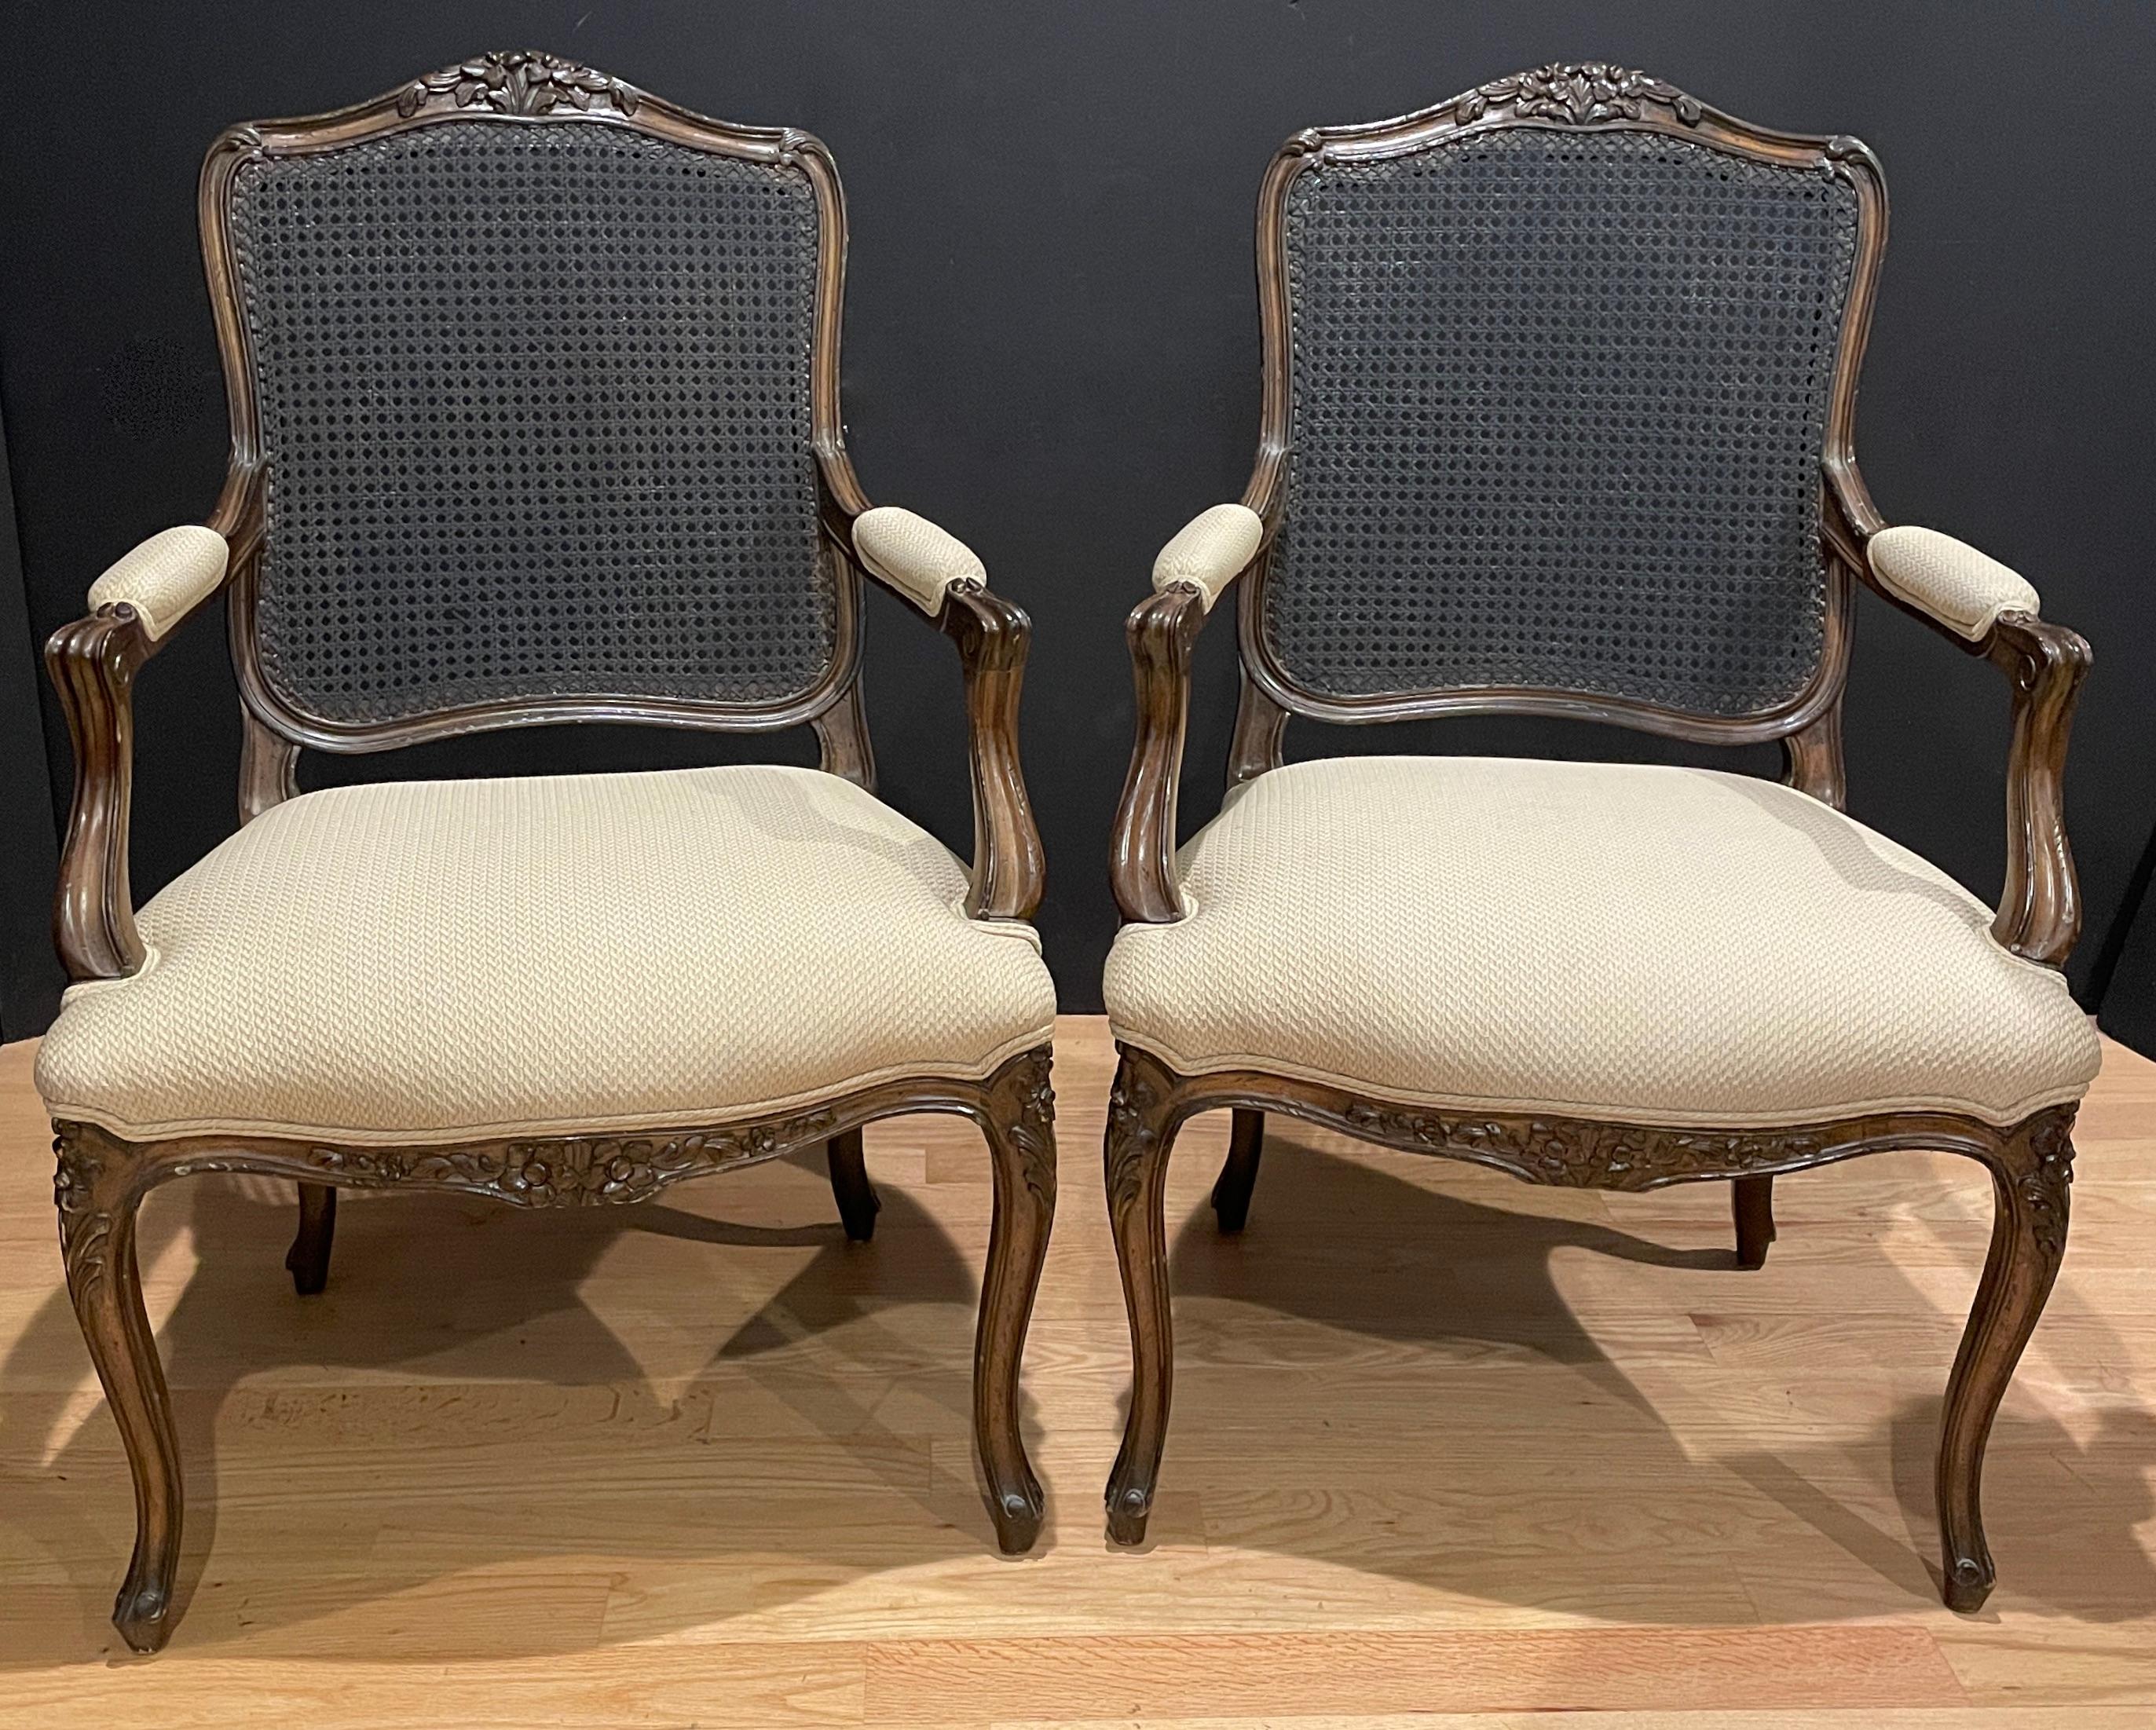 Pair of carved, caned and upholstered Louis XV style armchairs with light tan upholstery. Caned back and upholstered seat and arm pads. Floral carvings with walnut finished beechwood.